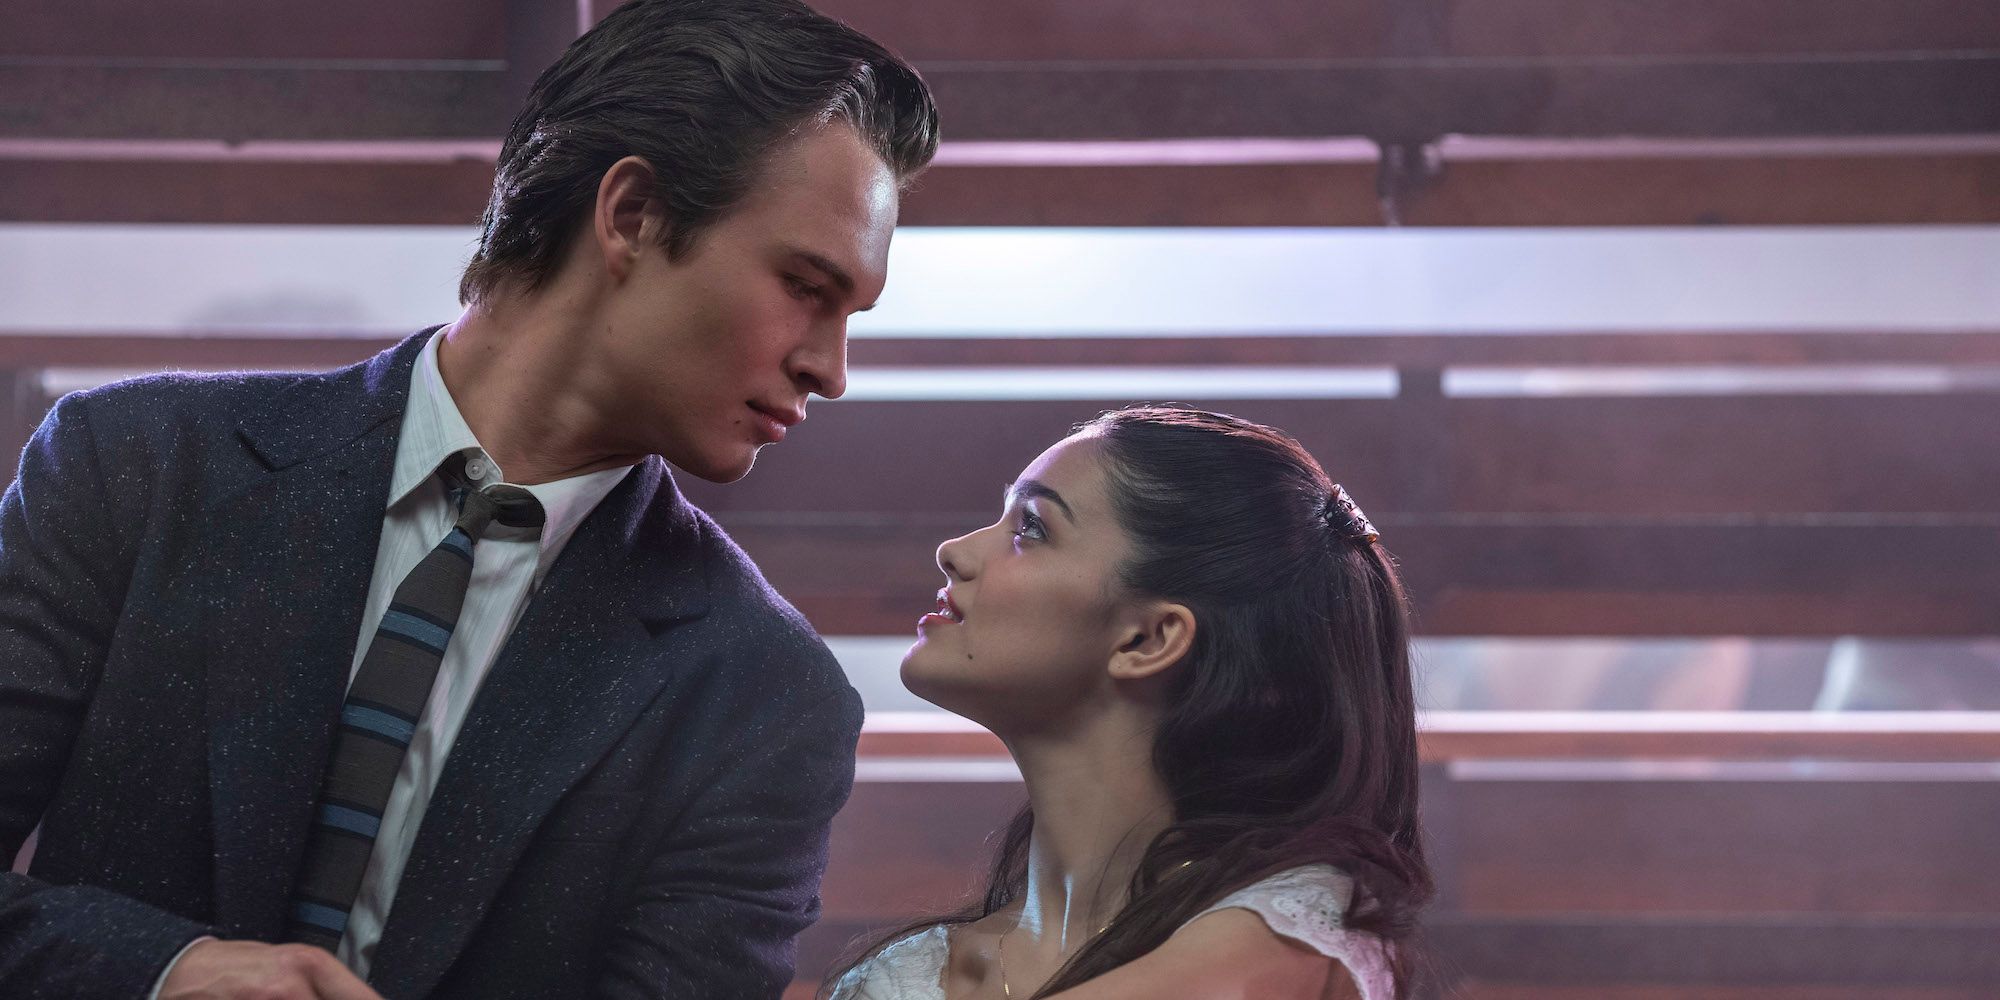 Ansel Elgort and Rachel Zegler look at each other behind the bleachers in West Side Story